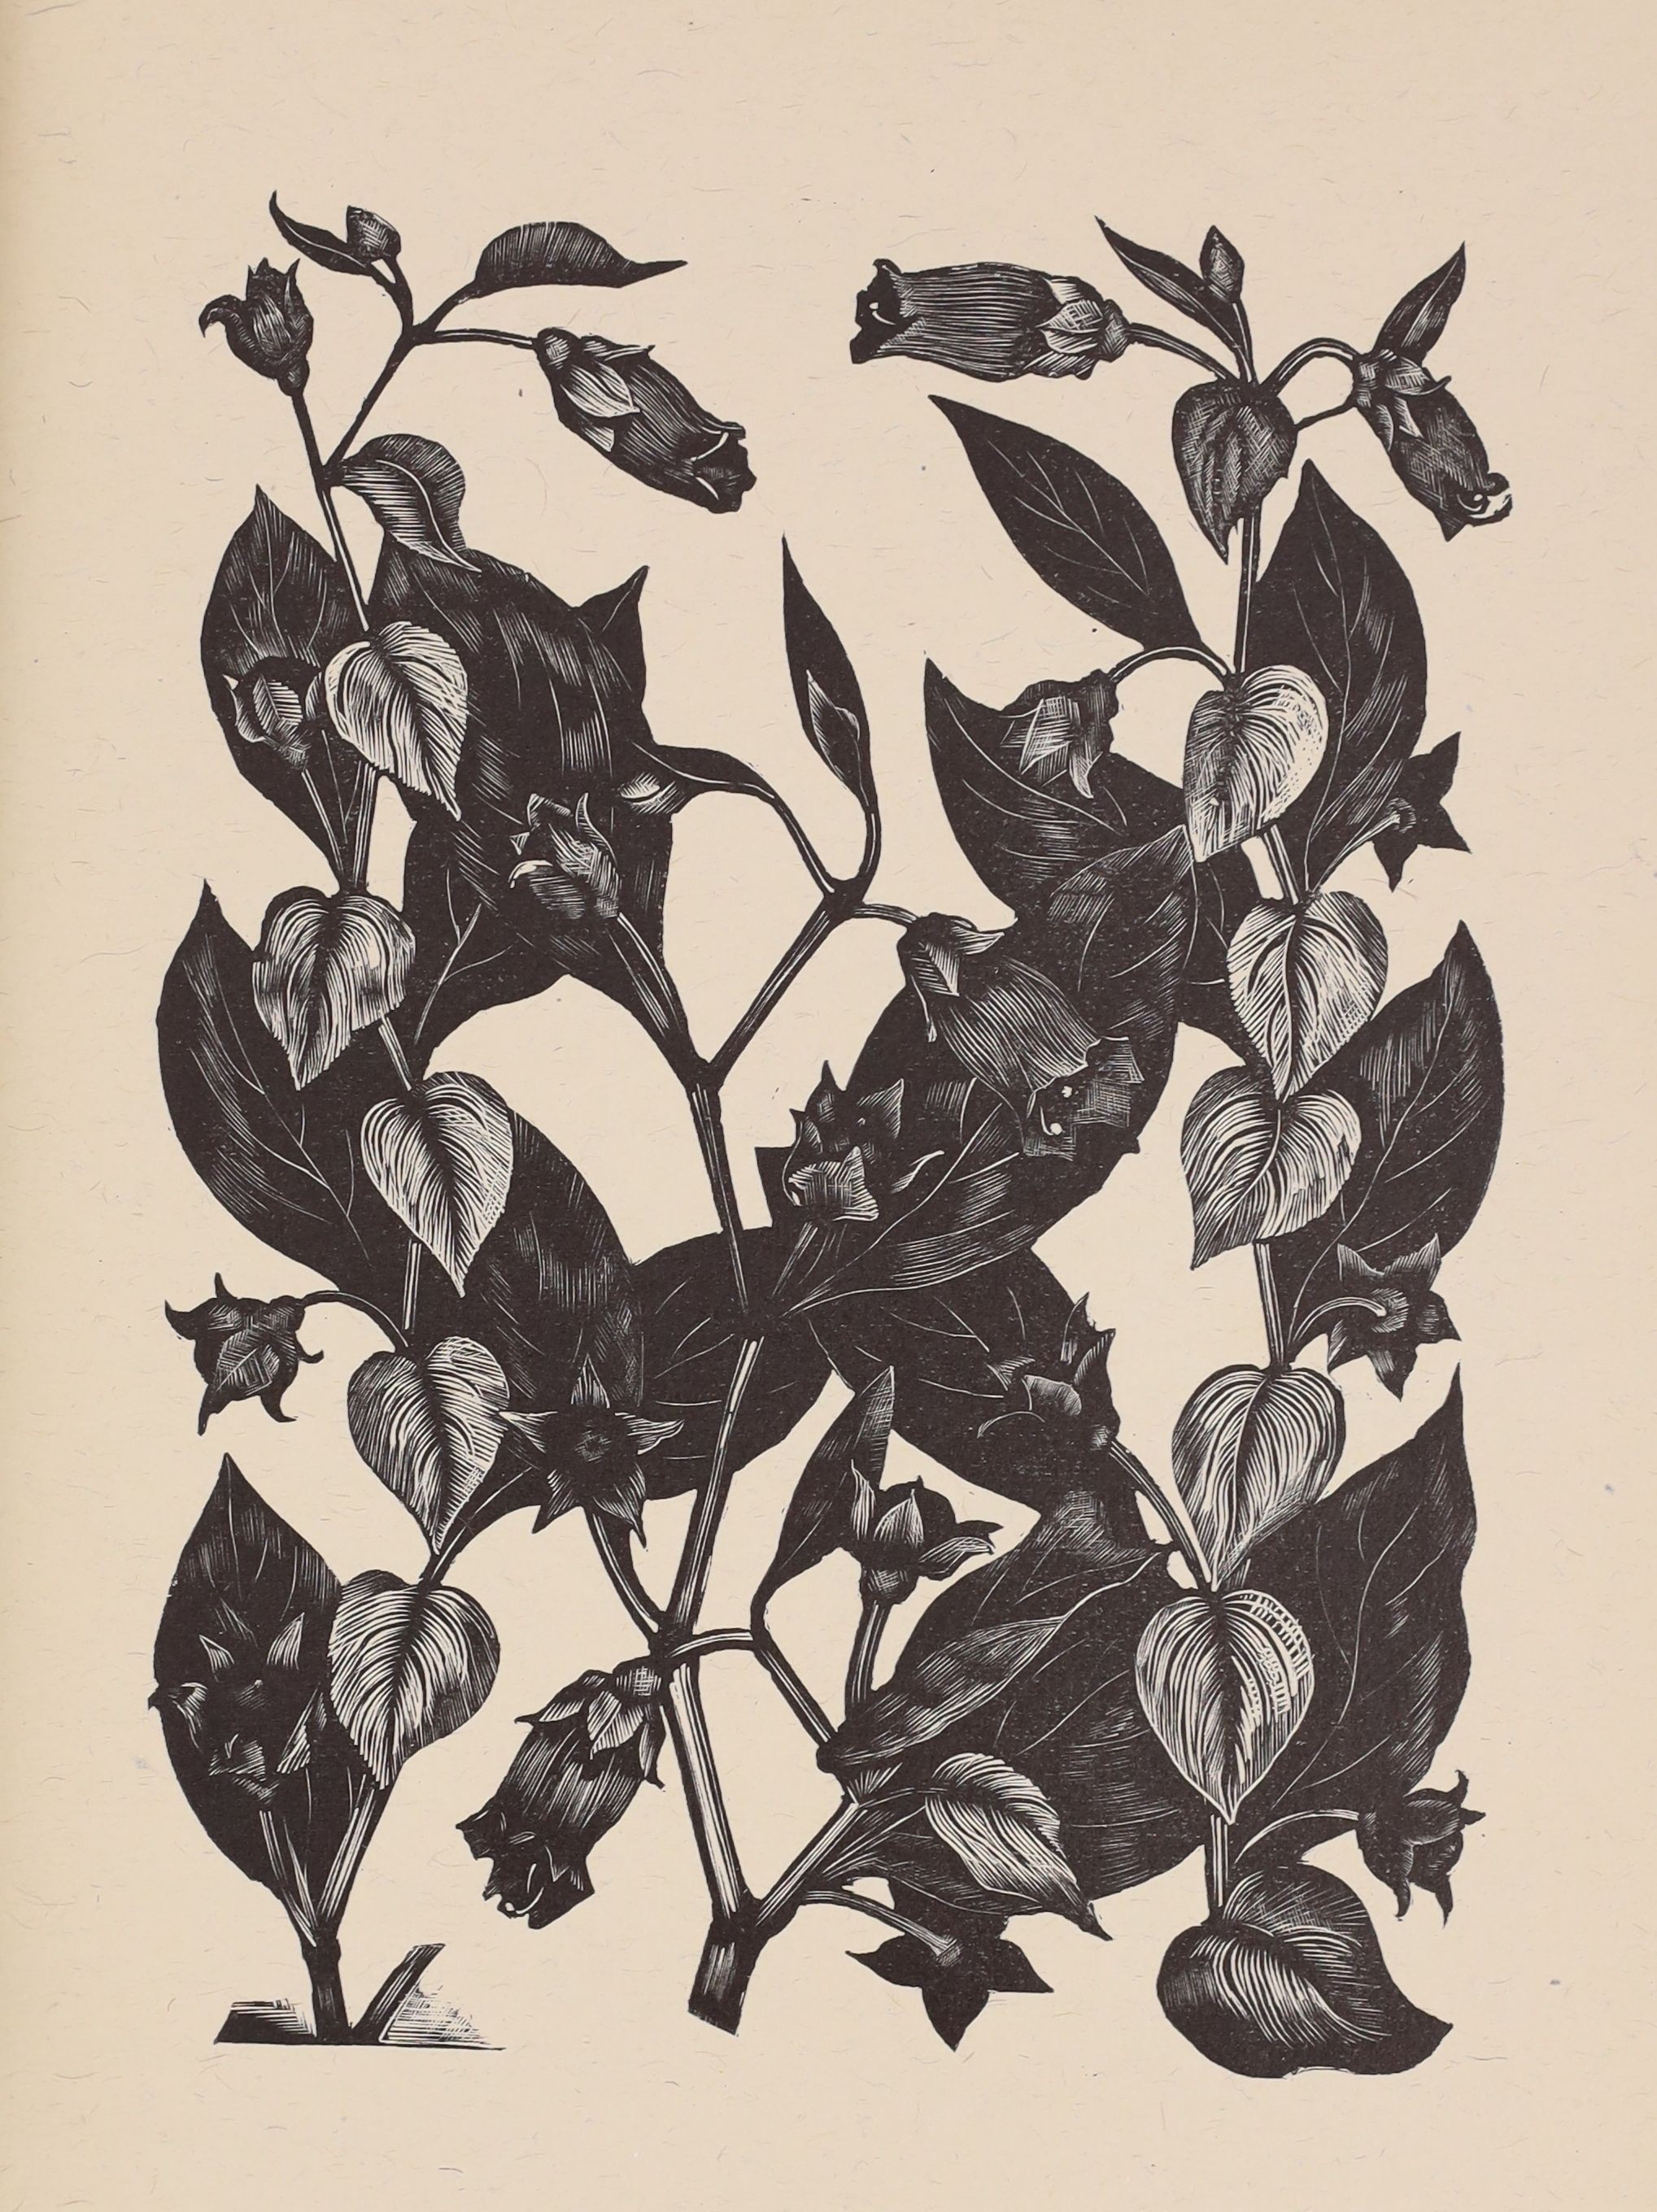 Dallimore, W. And Nash, John- Haslewood Books. Poisonous Plants Deadly, Dangerous and Suspect. Limited edition, one of 350. Complete with 20 woodcut engraved plates by John Nash. Original cloth with gilt pictorial to upp